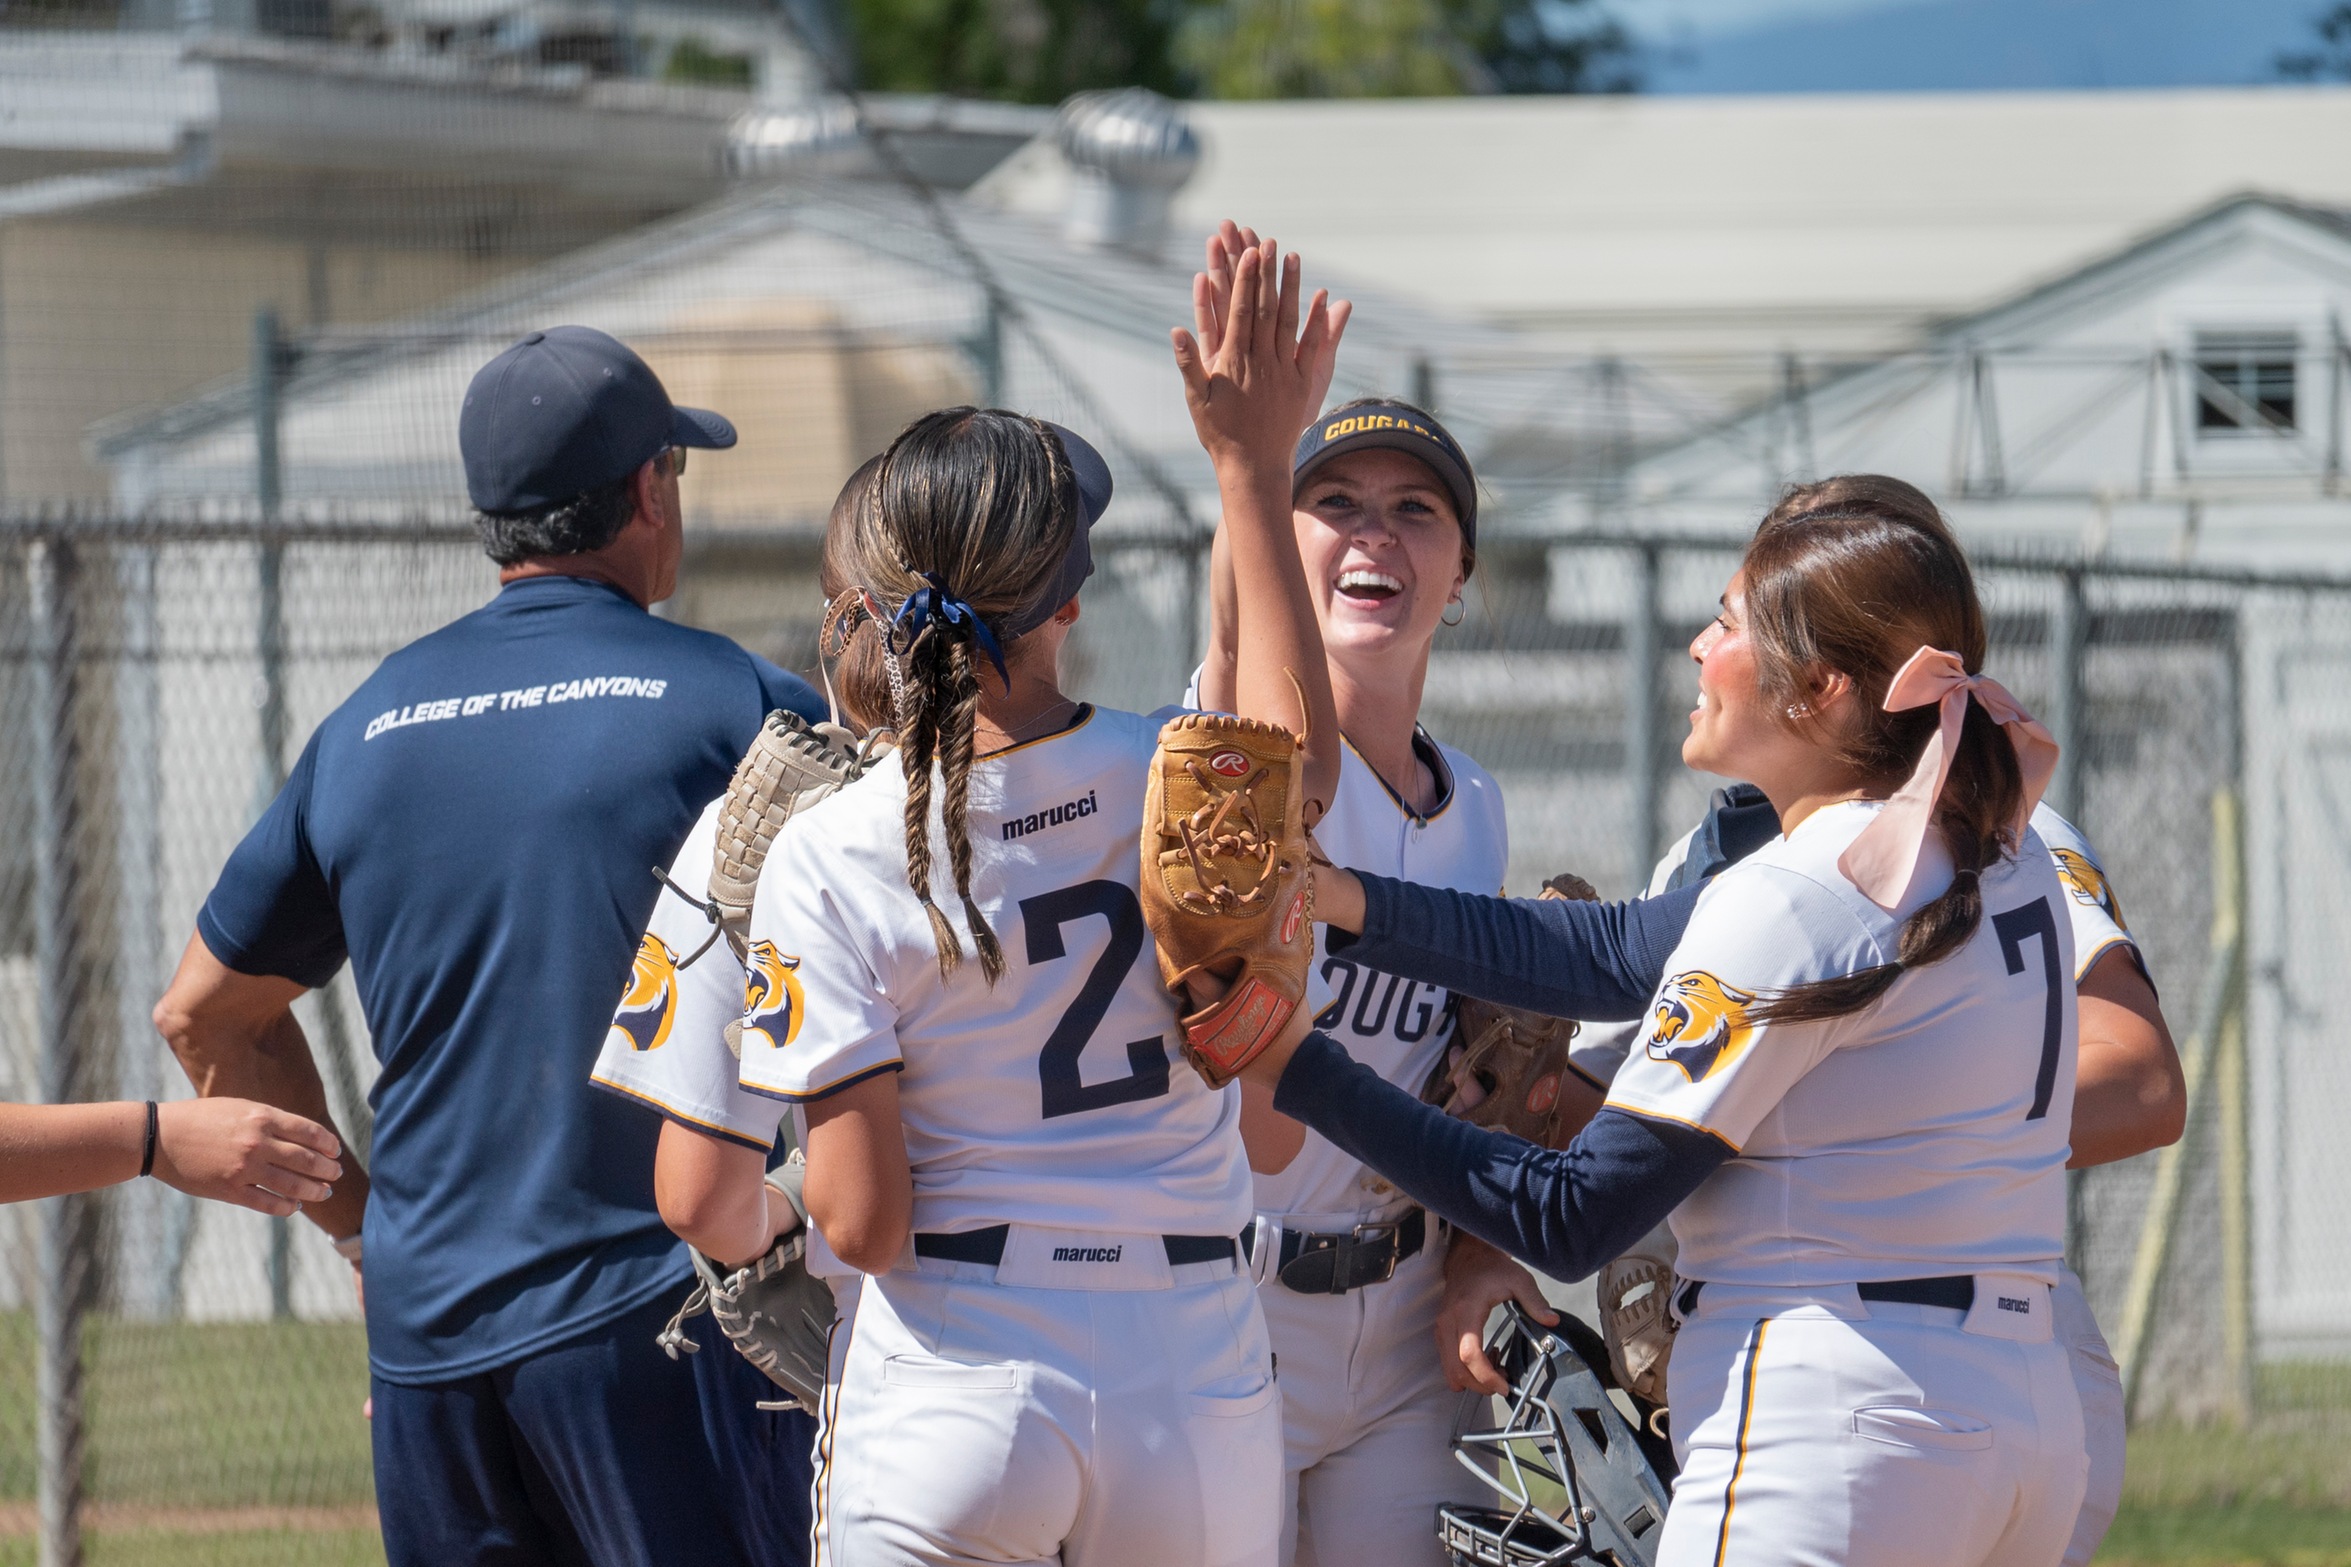 College of the Canyons softball players giving high fives after a recent victory.